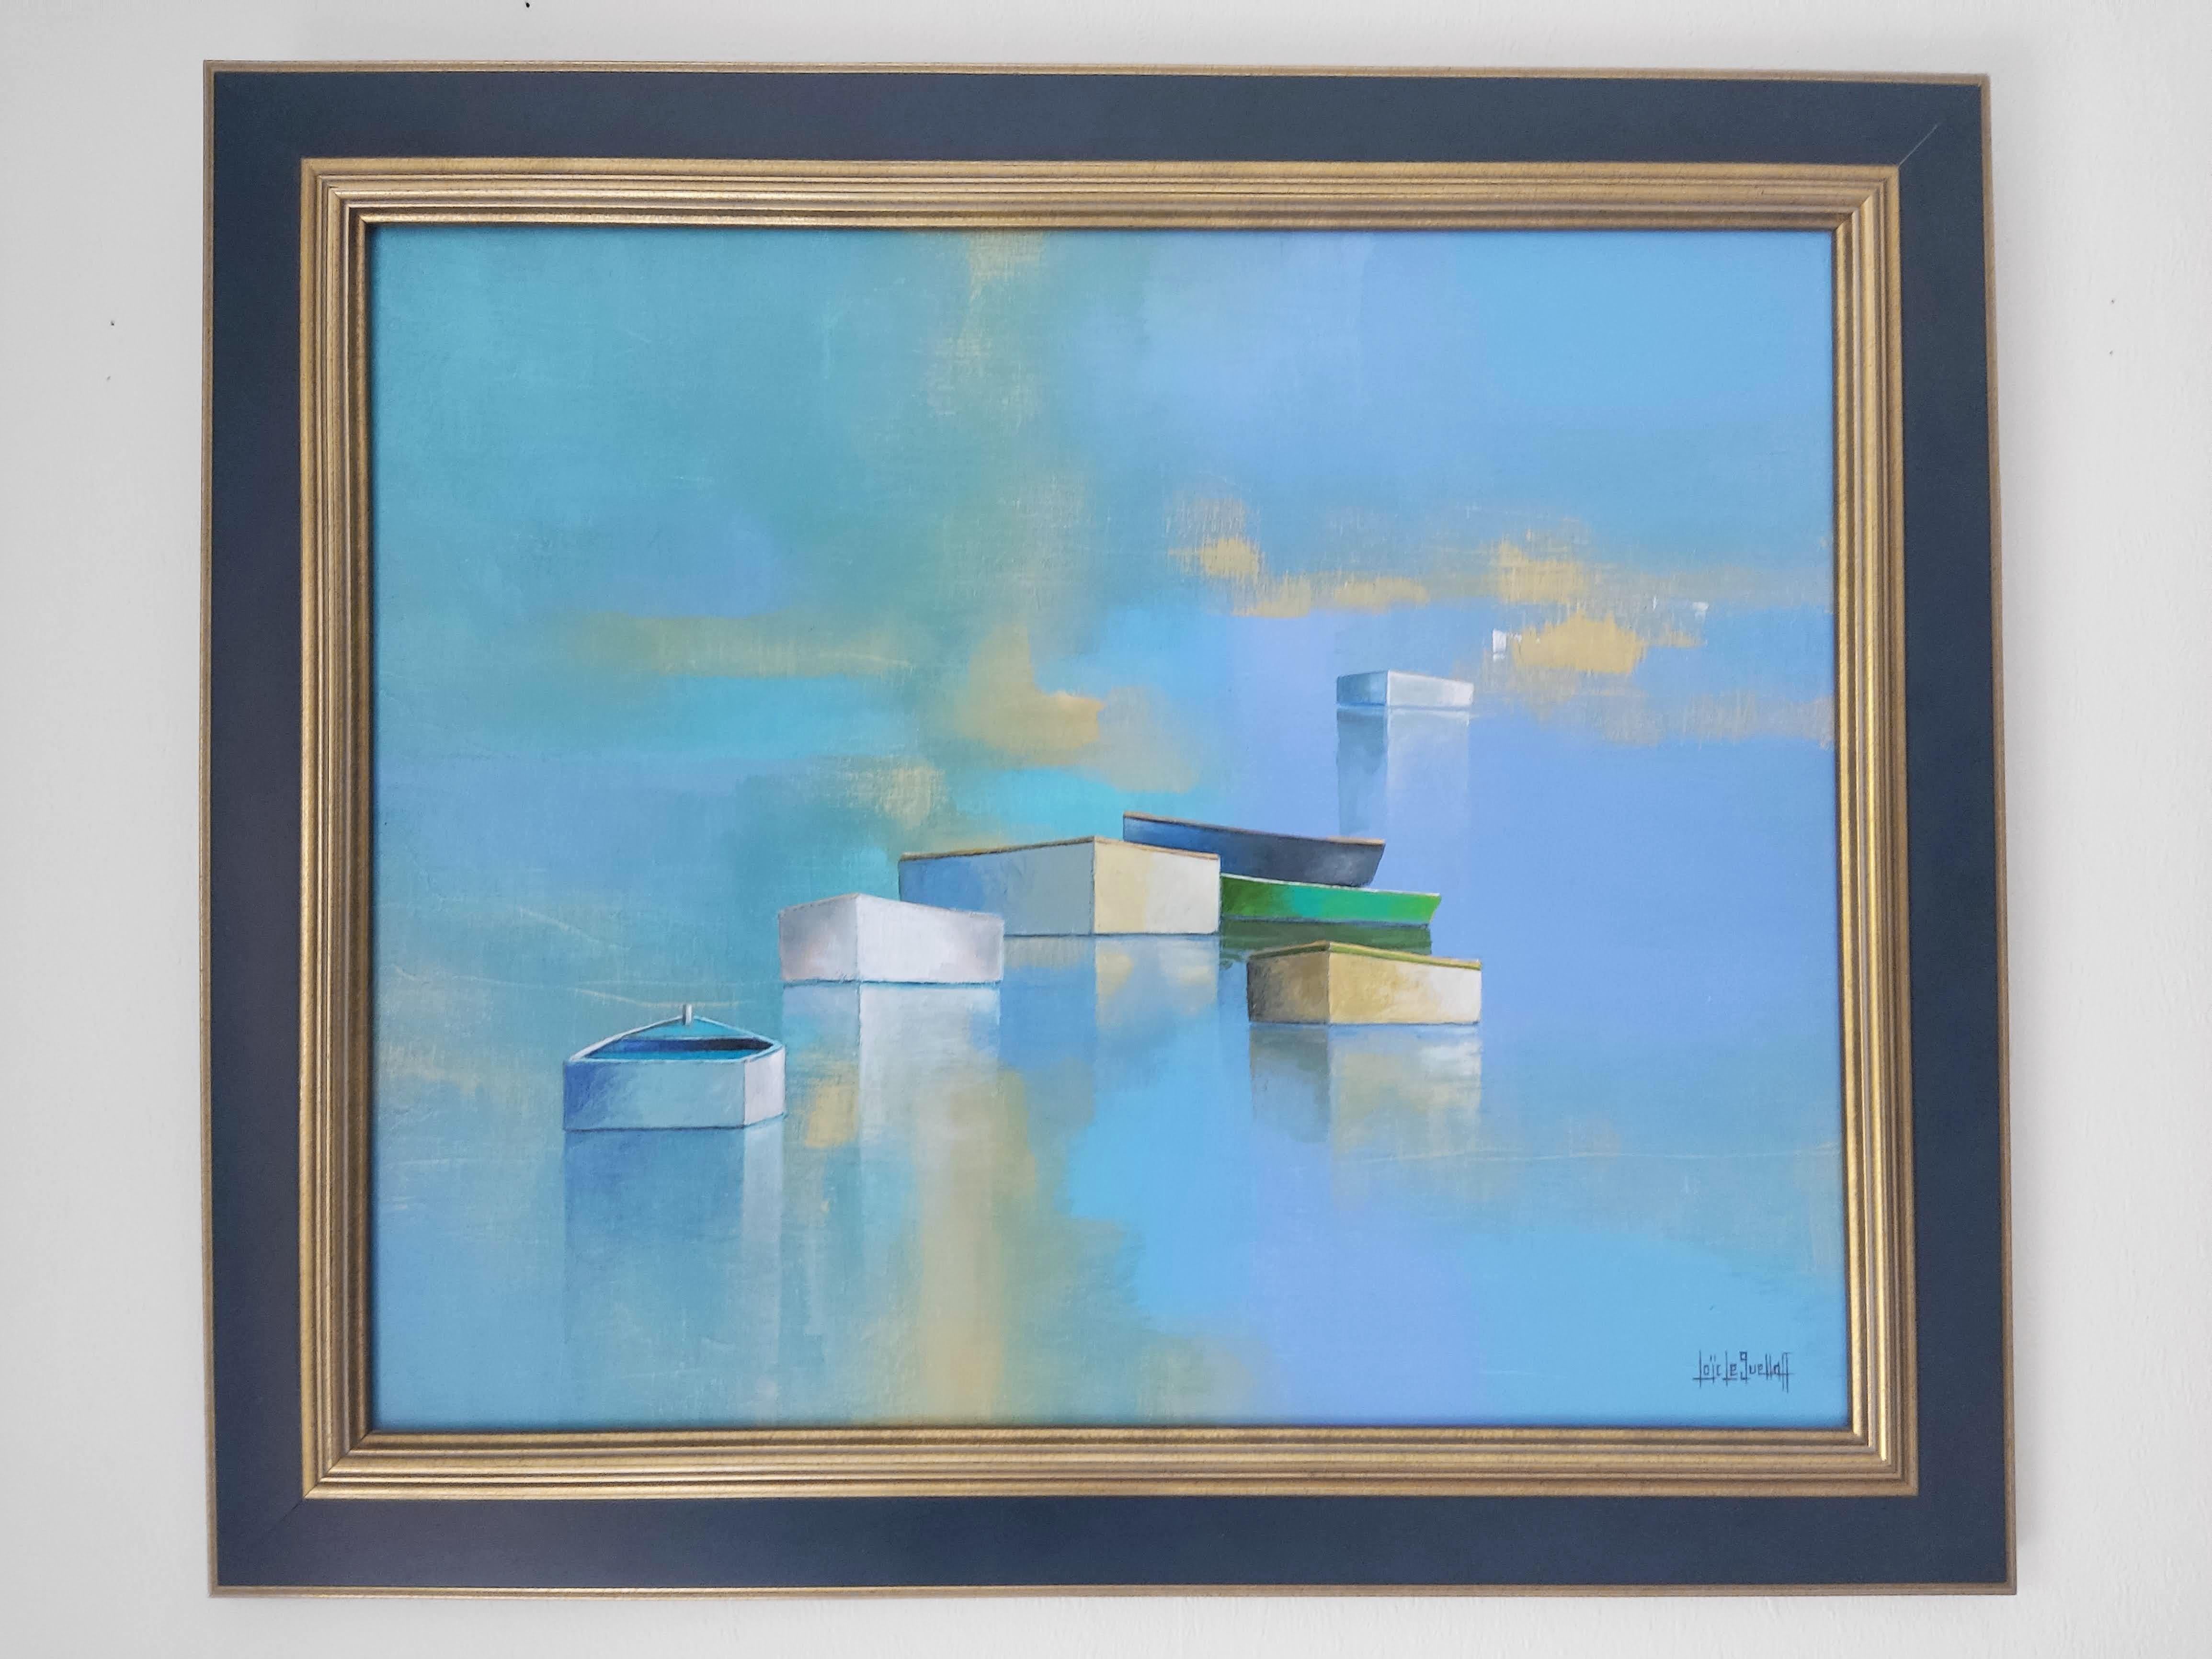 Work :  Original Painting, Unique Work. Painted in 1997. Framed. Provenance from Private collection in France. Very good Condition.
Medium : Acrylic on Linen Canvas.
Artist : Loïc Le Guellaff
Subject : Reflets de mer (Frensh Title), (EN : Sea